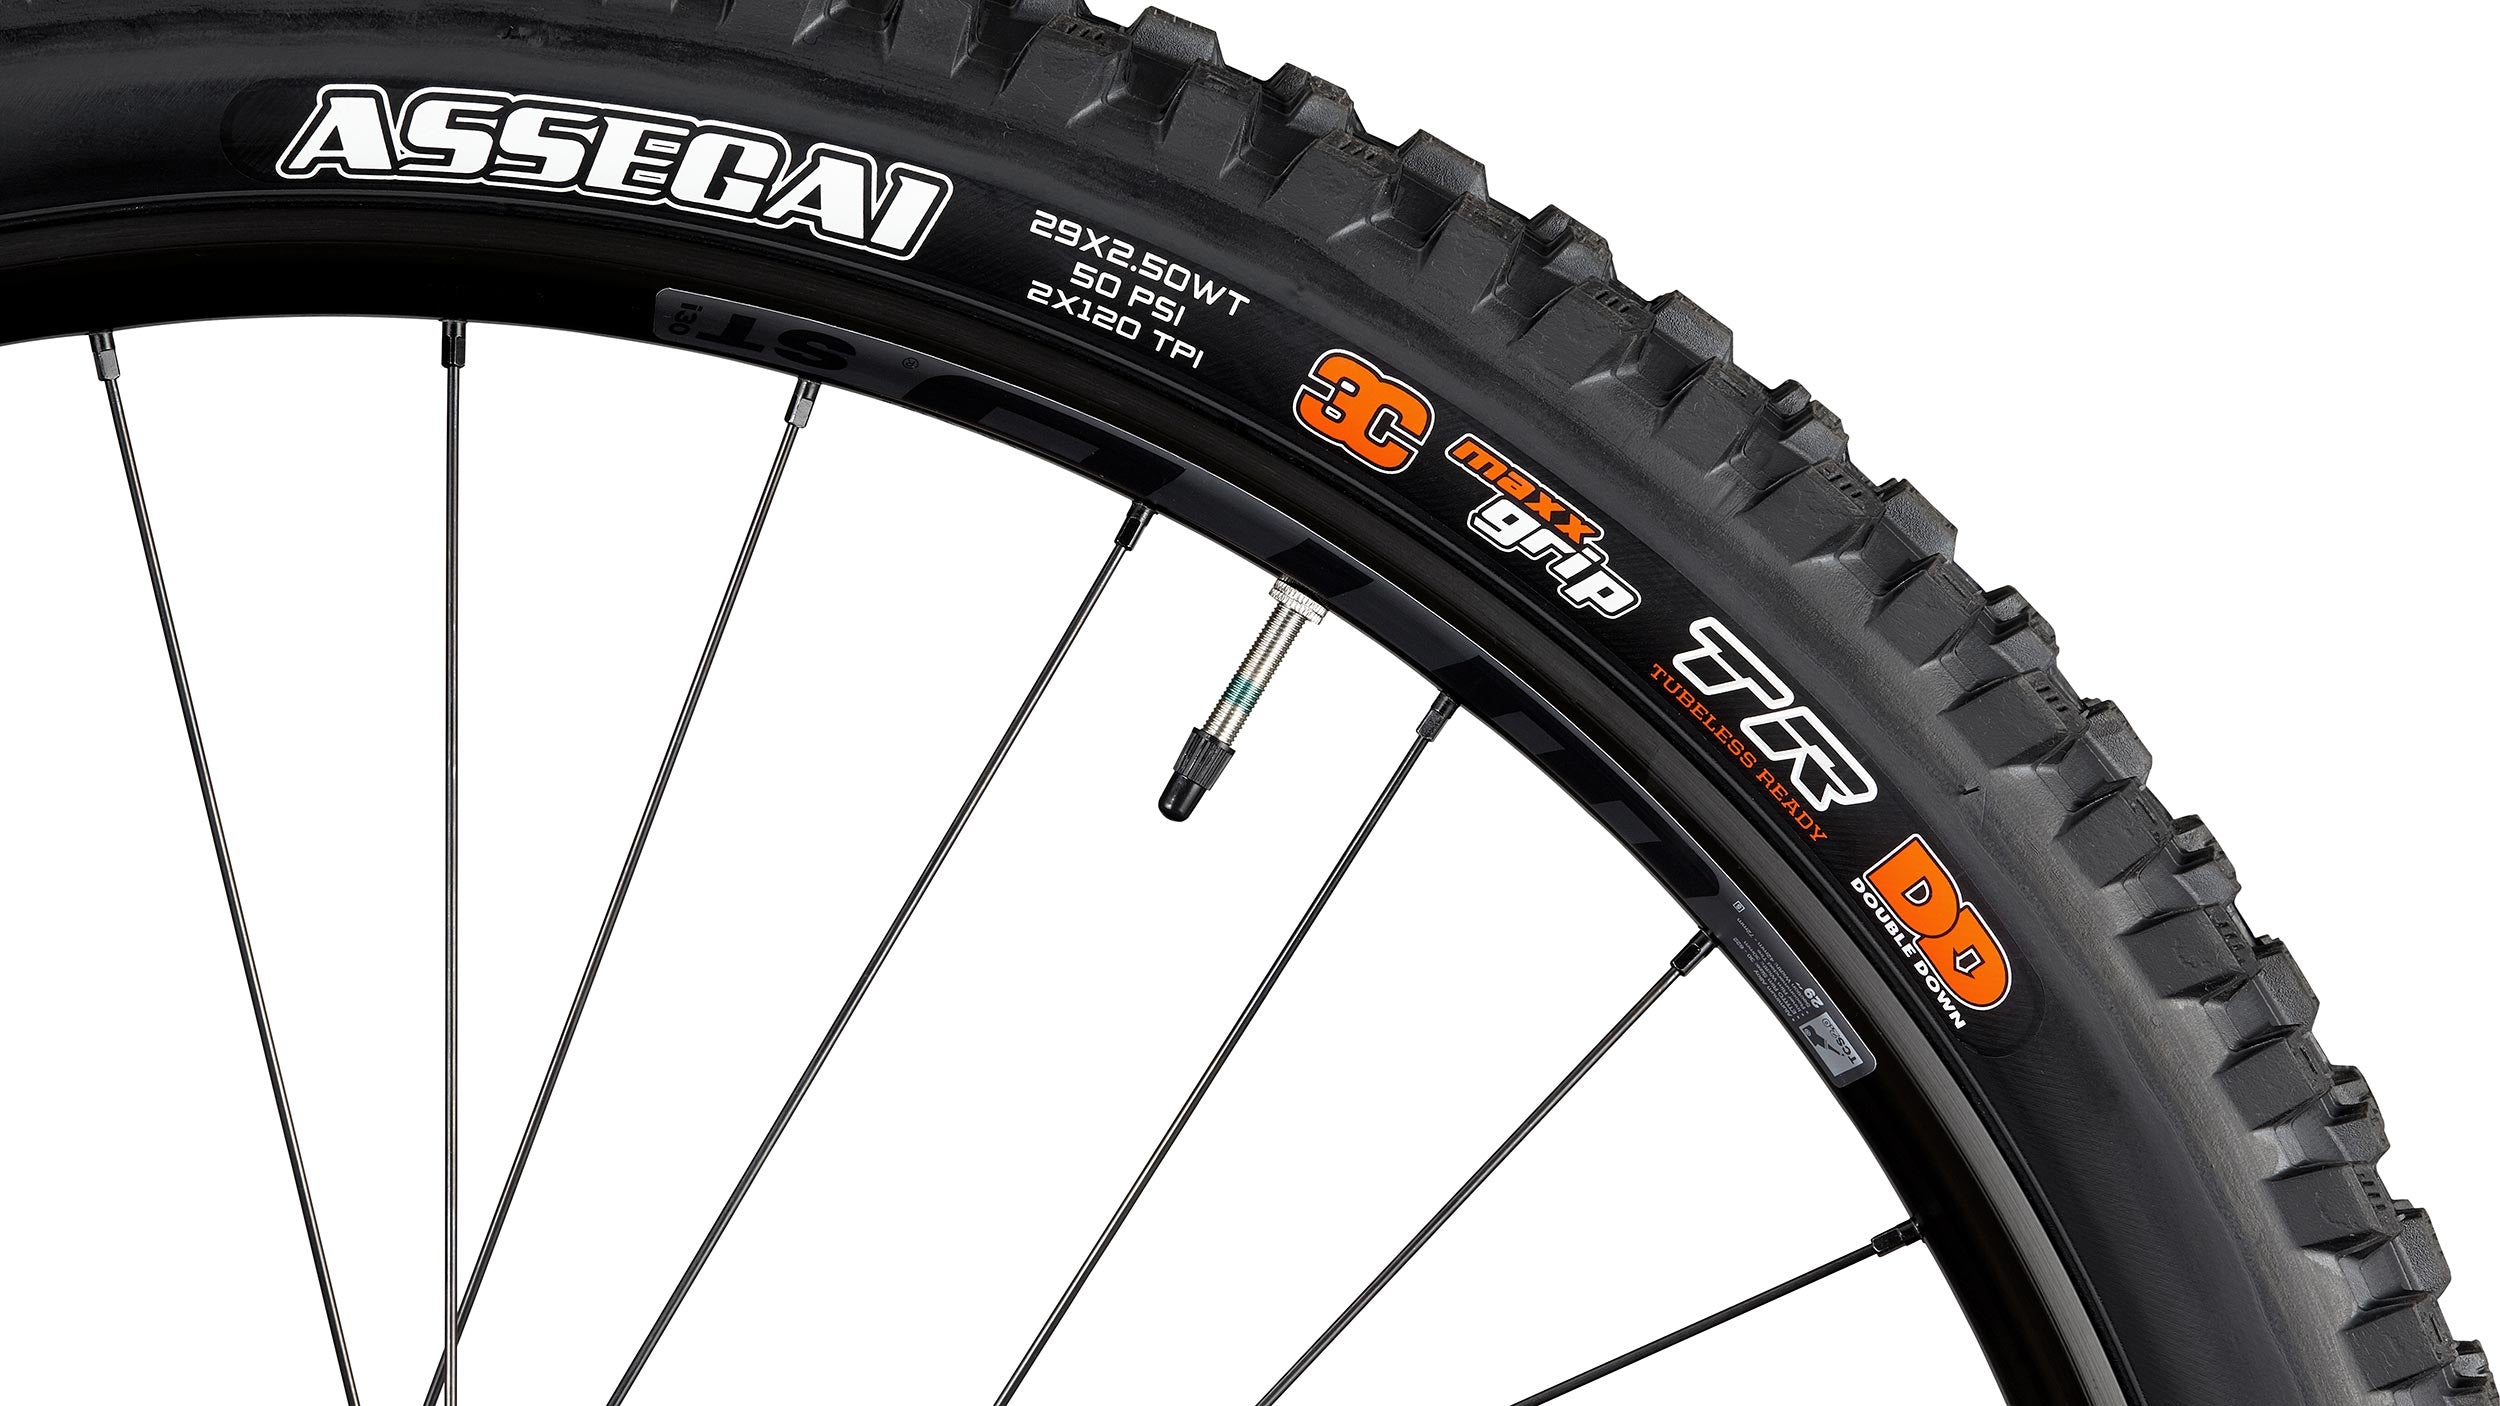 _caption_Maxxis Double Down tires are renowned for their exceptional traction and durability. These tires are designed to withstand rough terrains and provide superior grip for confident riding.